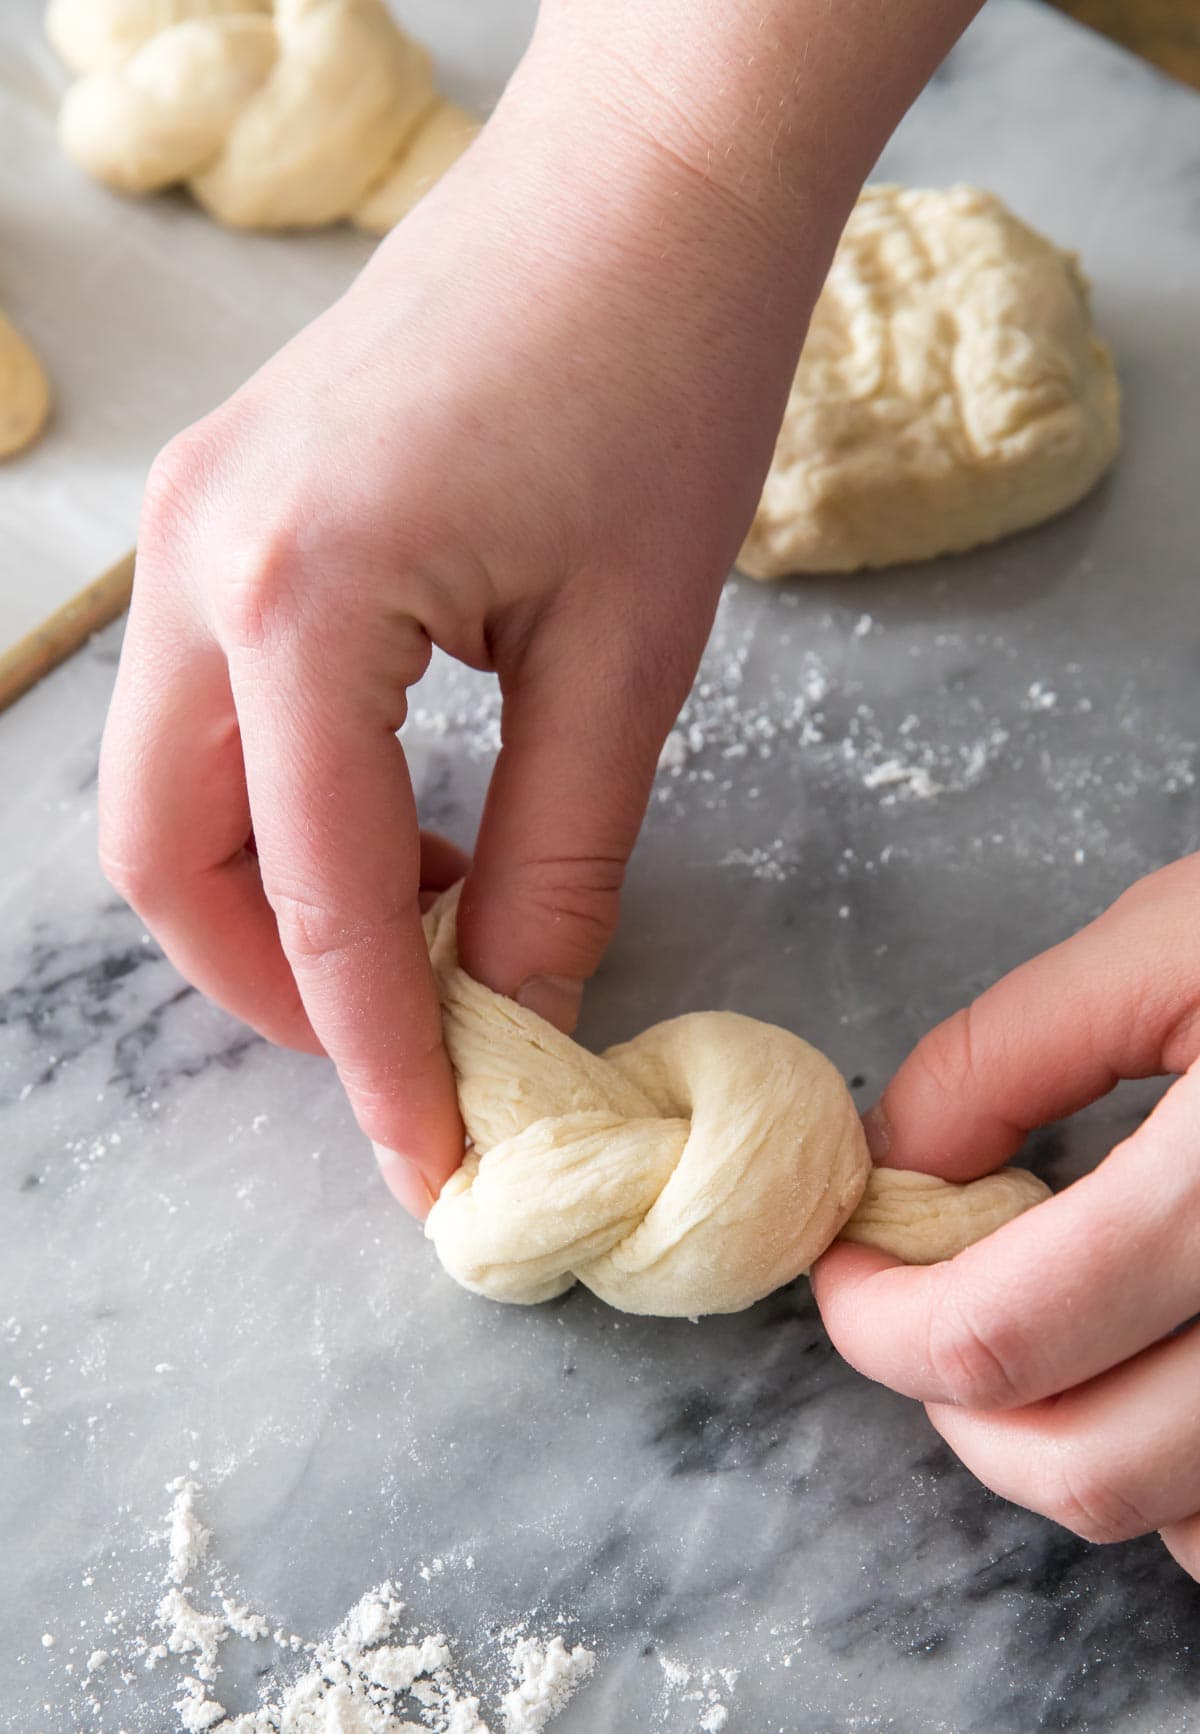 Hands twisting bread dough into a knot.